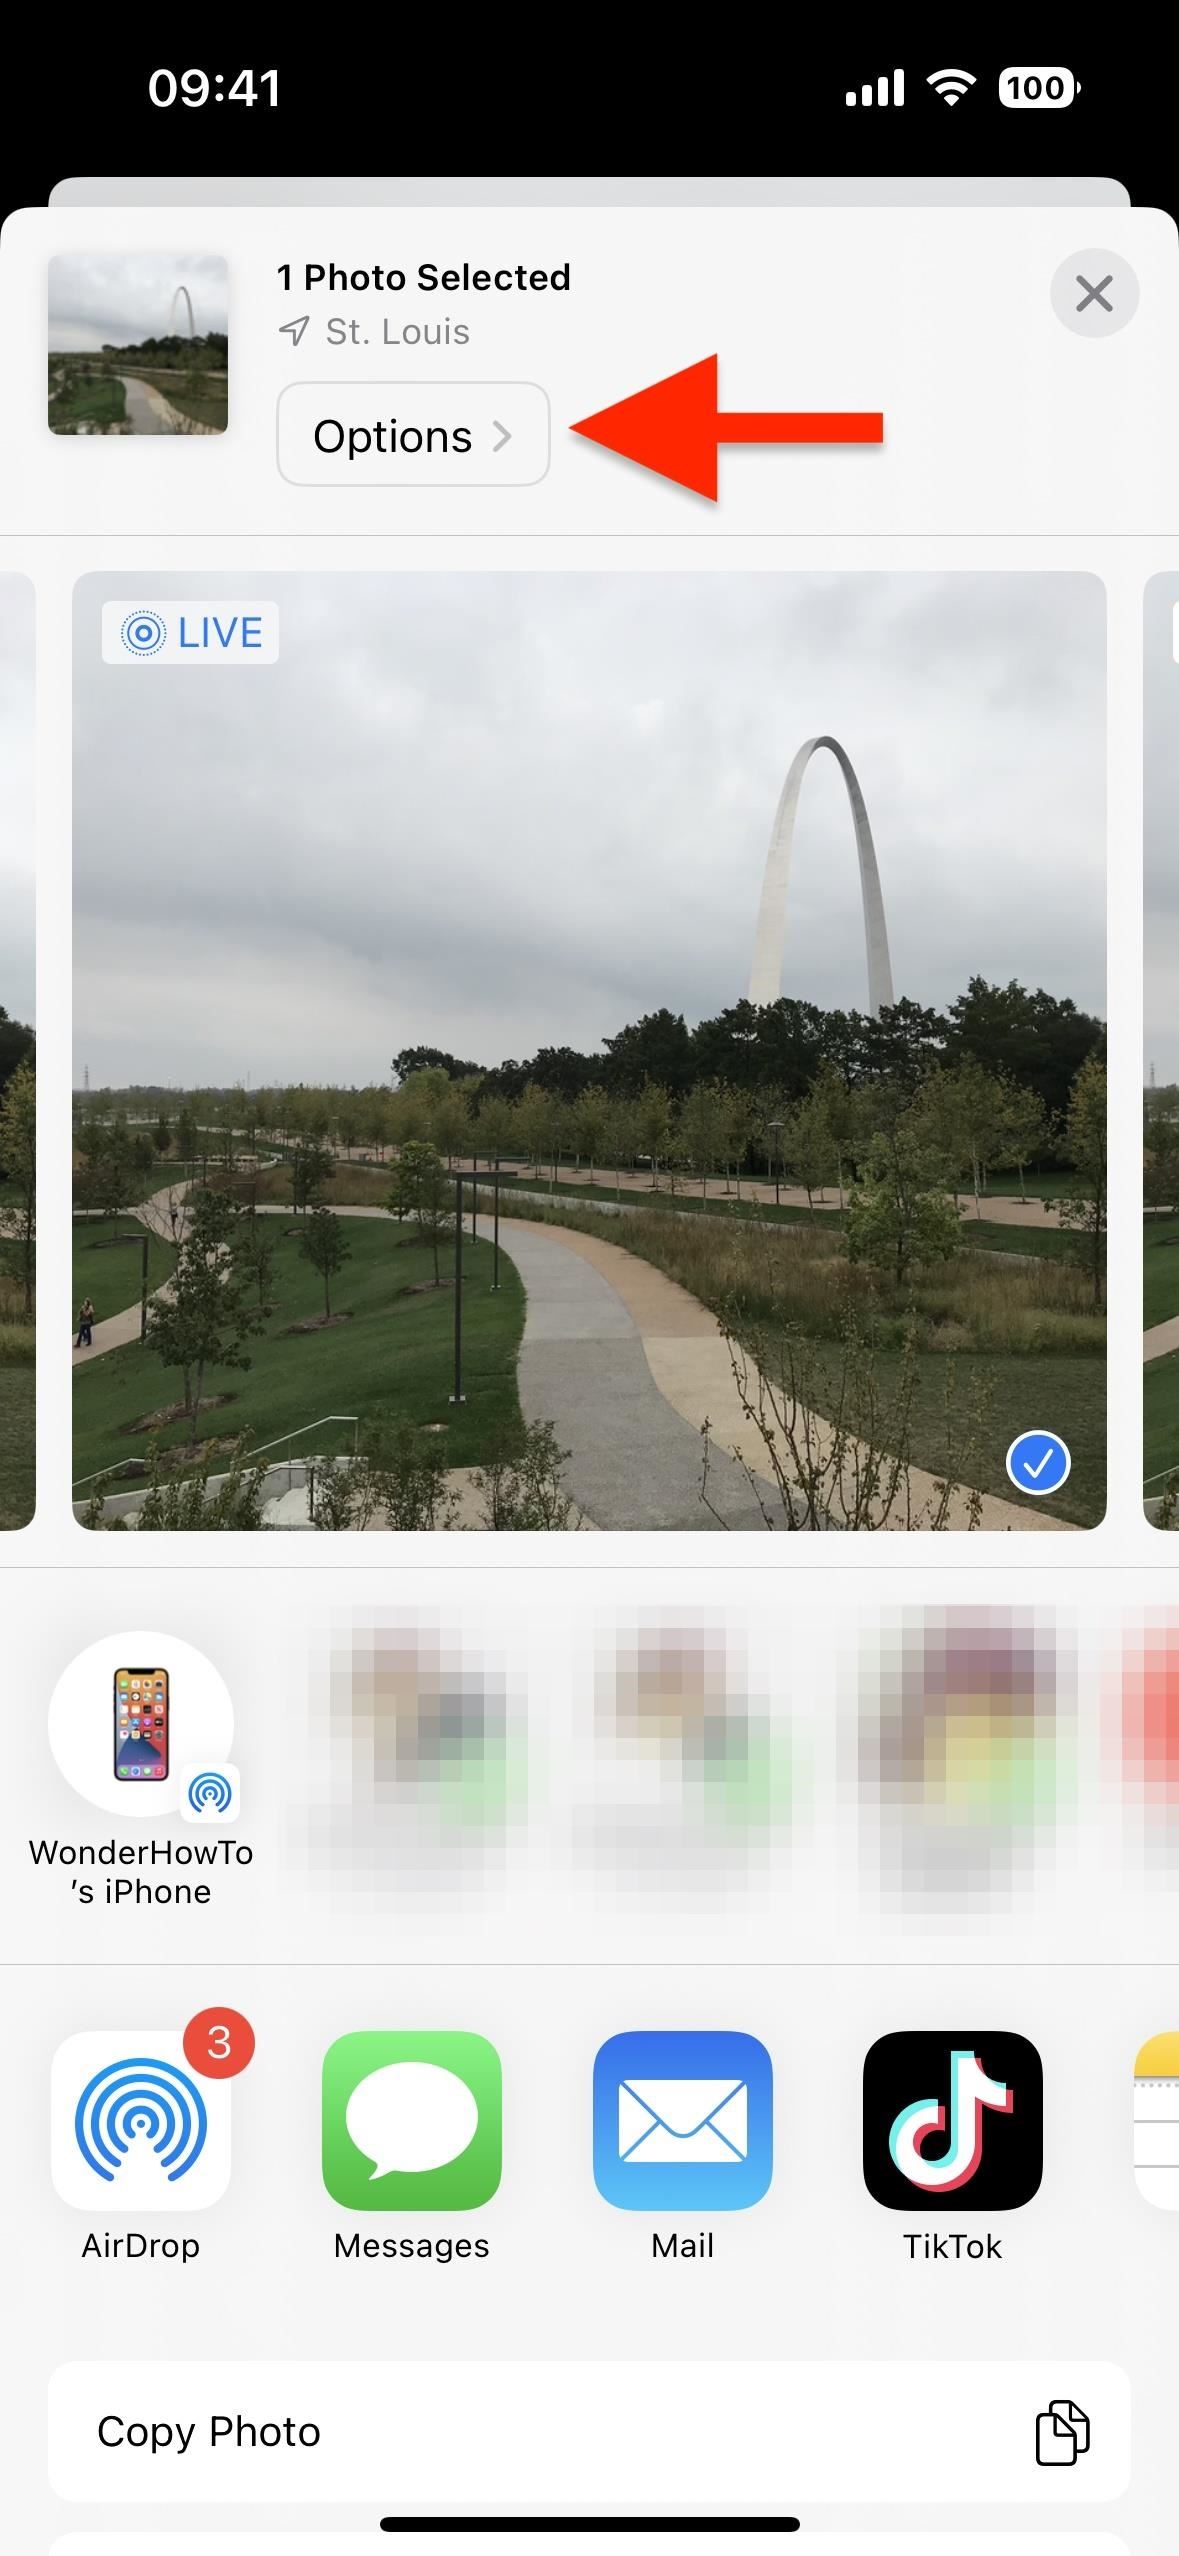 It's easy to fake geotagging photos on your iPhone to keep real locations secret